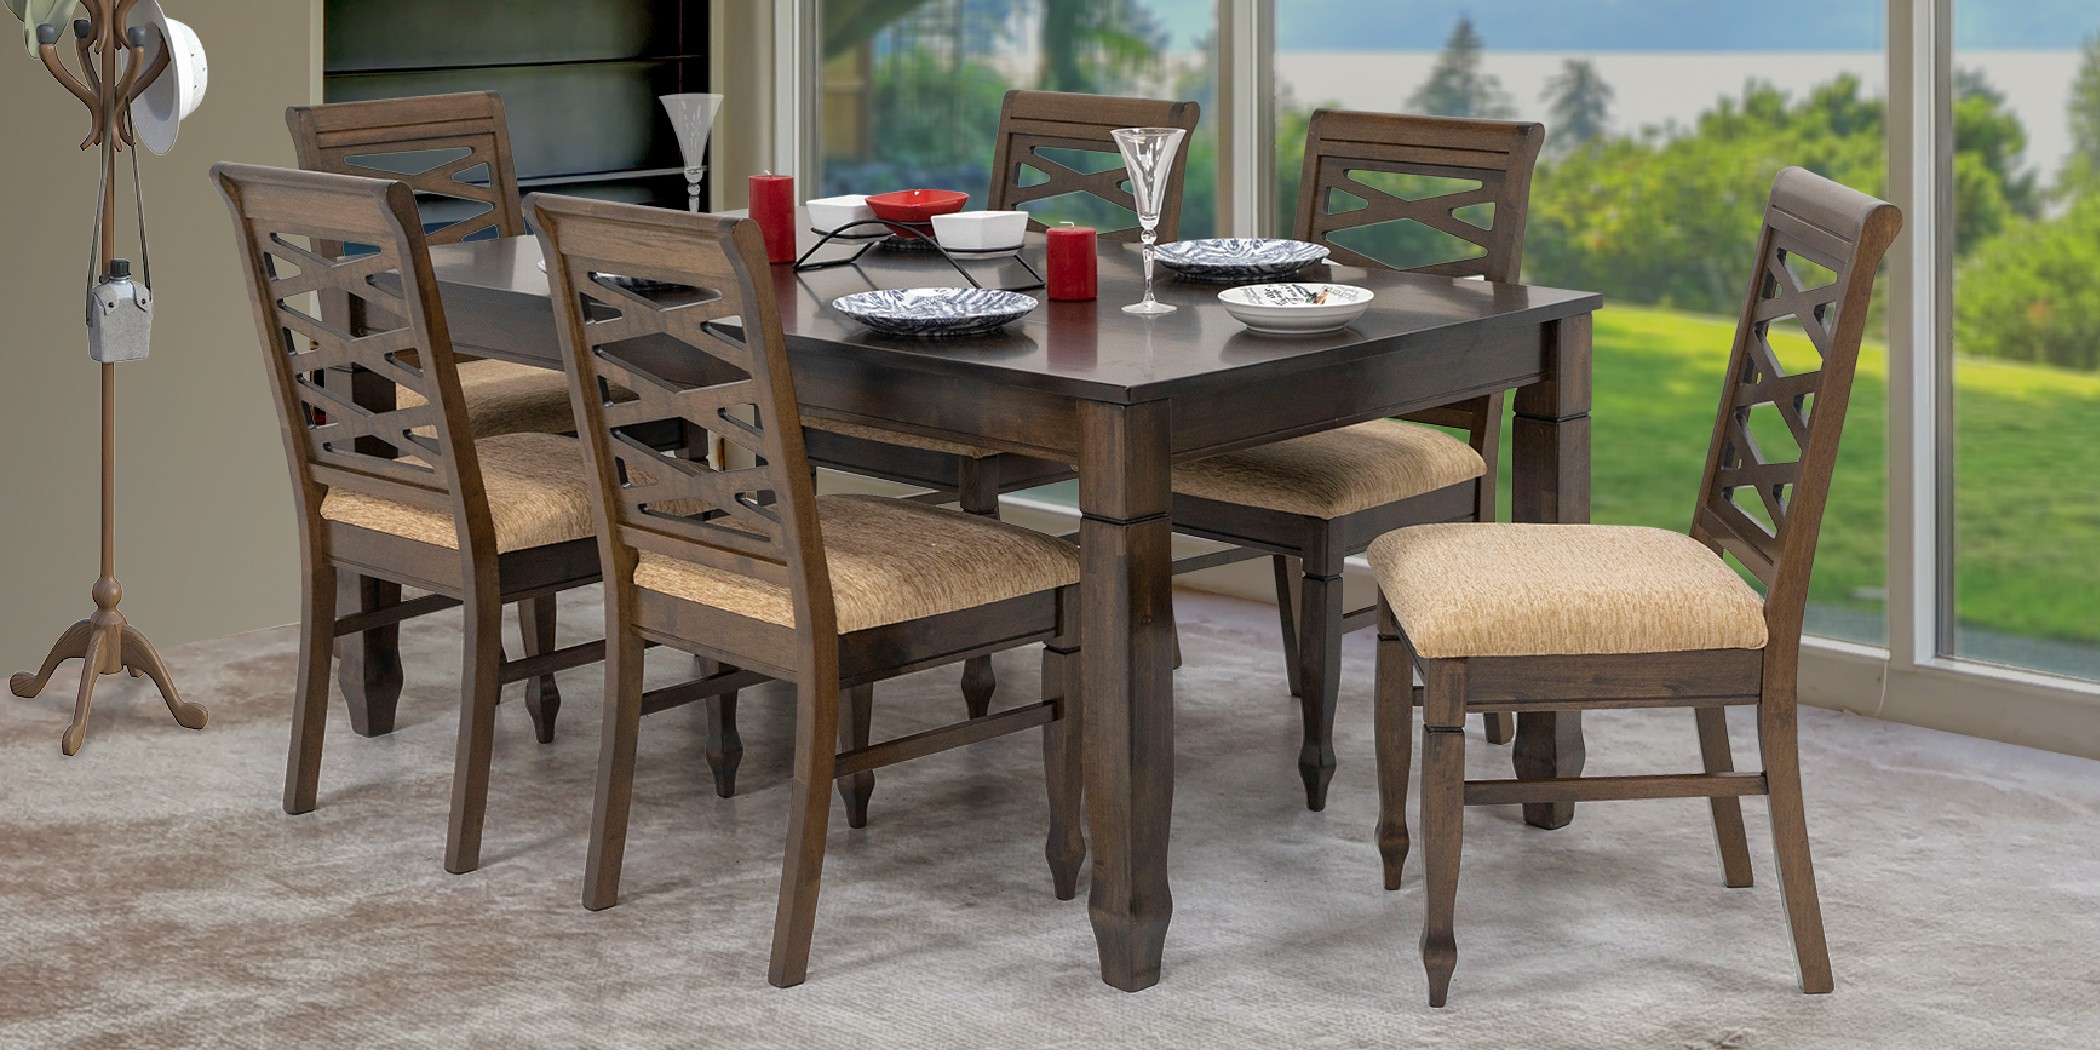 Nairobi Table and 6 Chairs Rubberwood